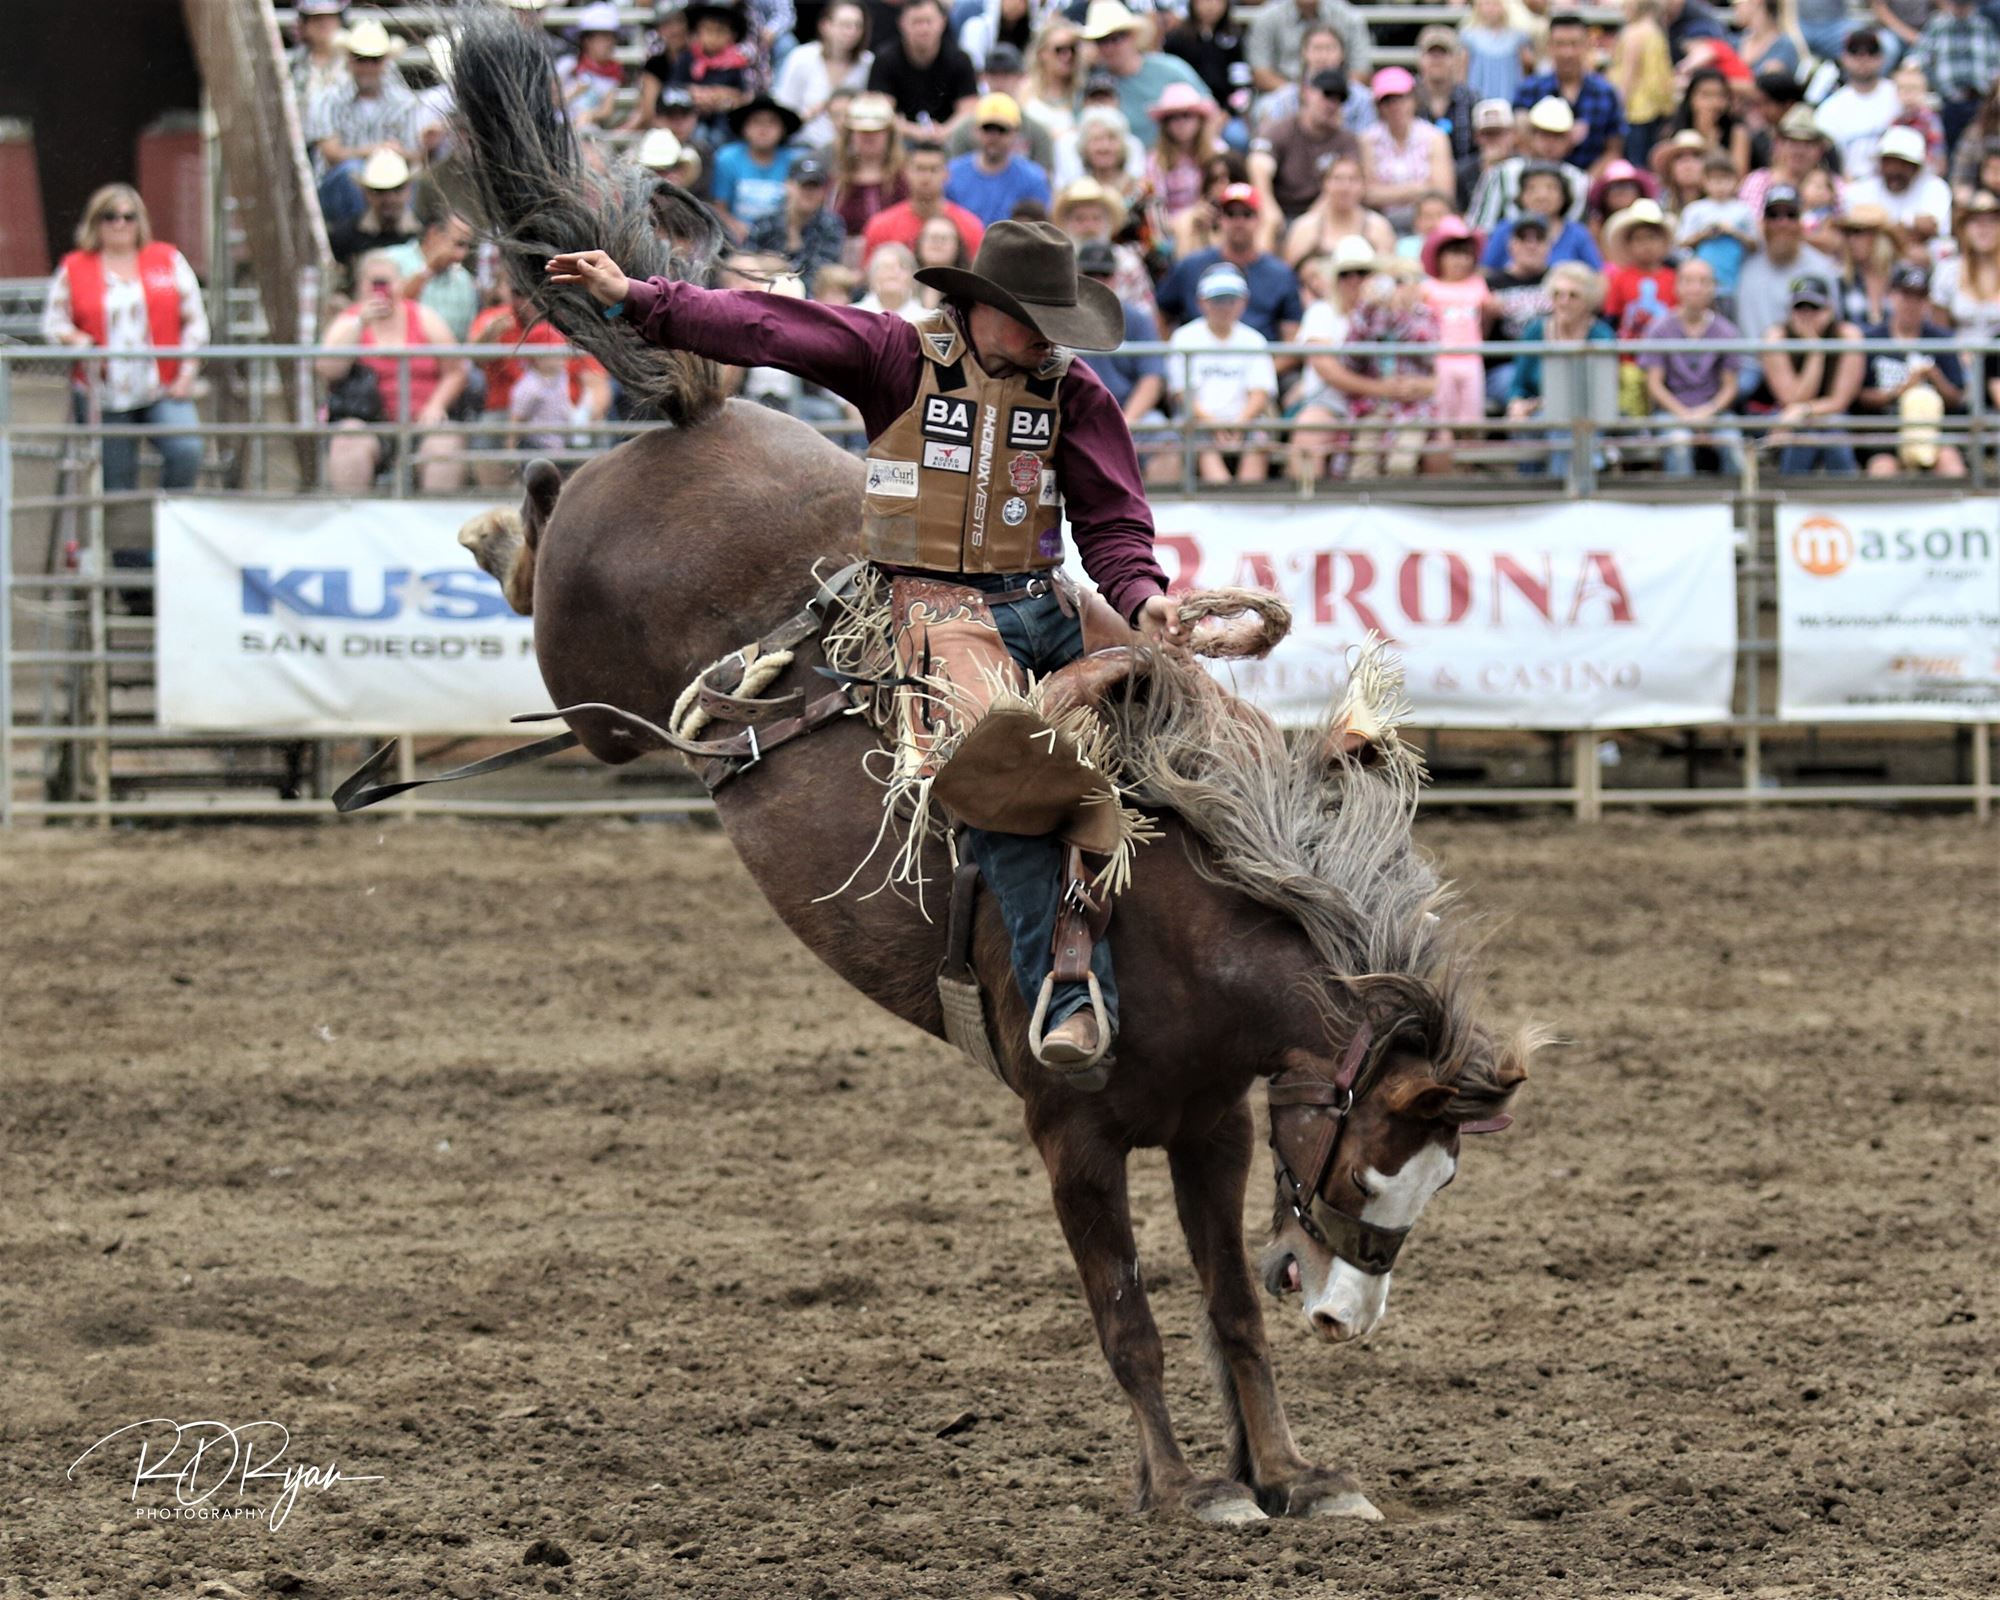 Lakeside Rodeo Talent and The 7 Events of Rodeo